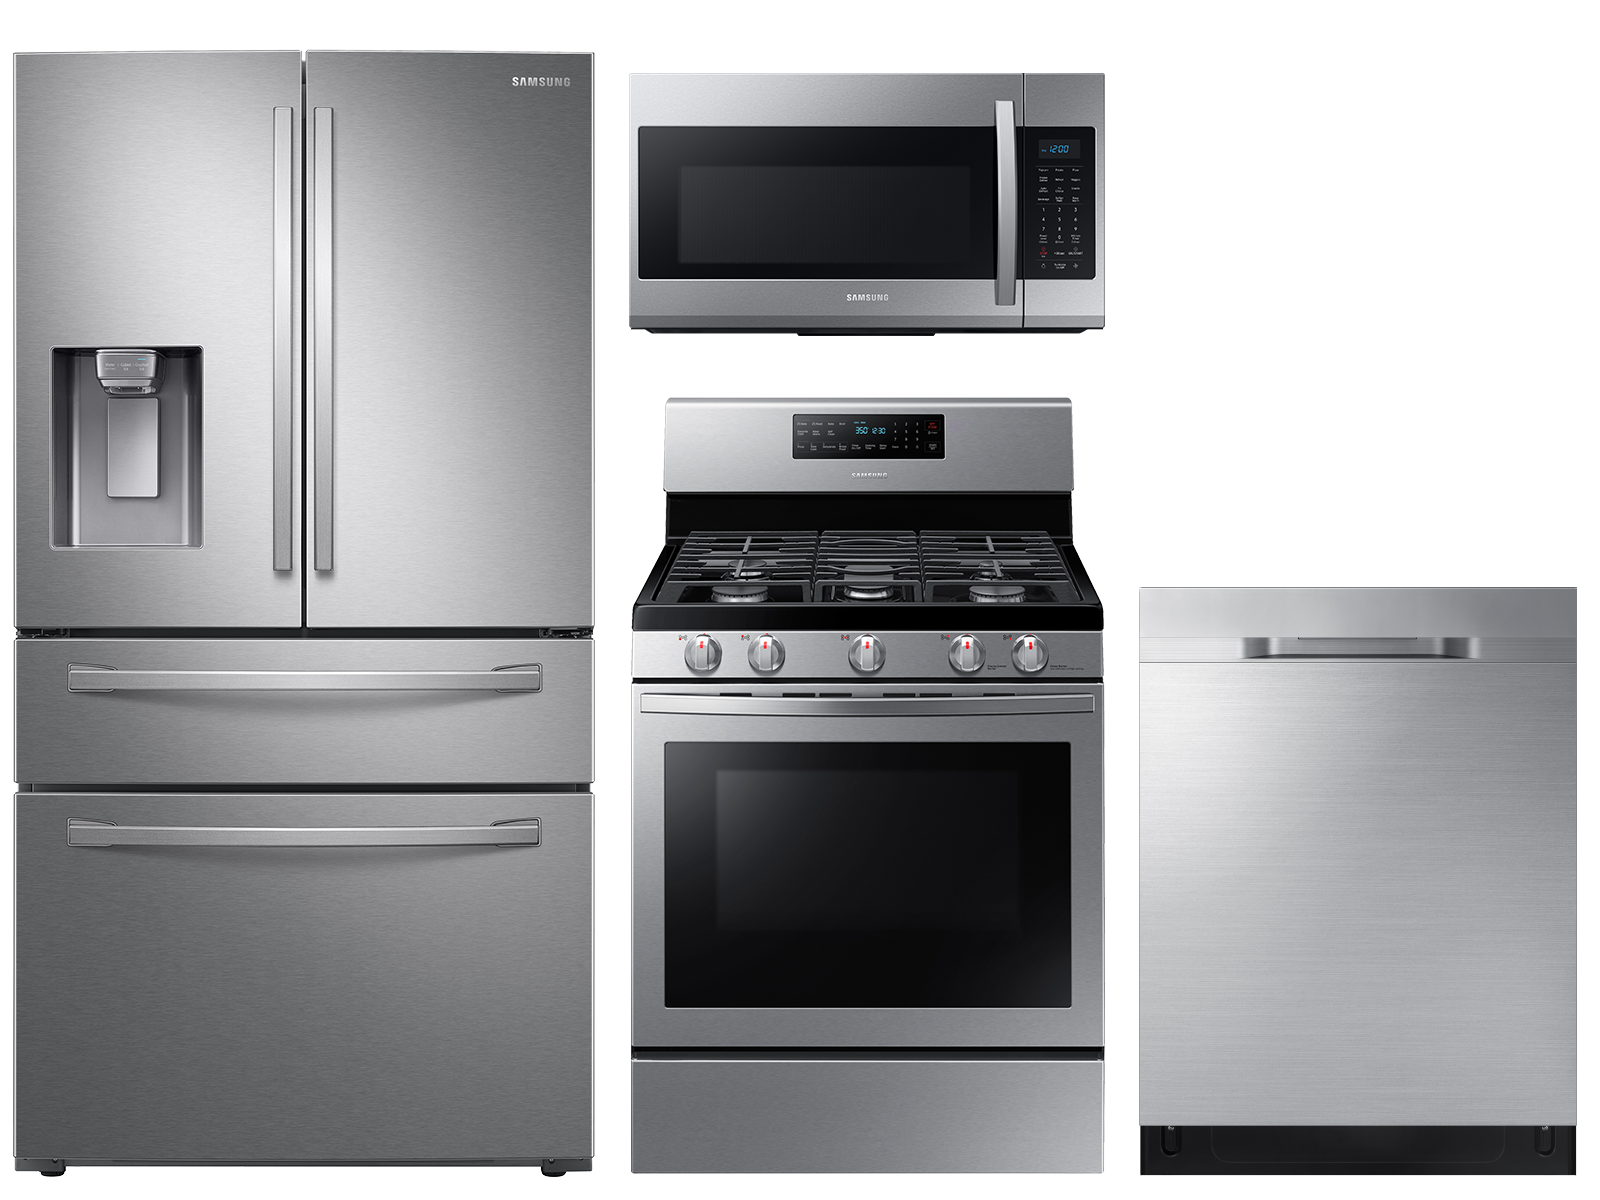 Samsung Large Capacity 4-door Refrigerator + Gas Range with Convection + StormWash™ Dishwasher + Microwave in Stainless Steel(BNDL-1646291345420)